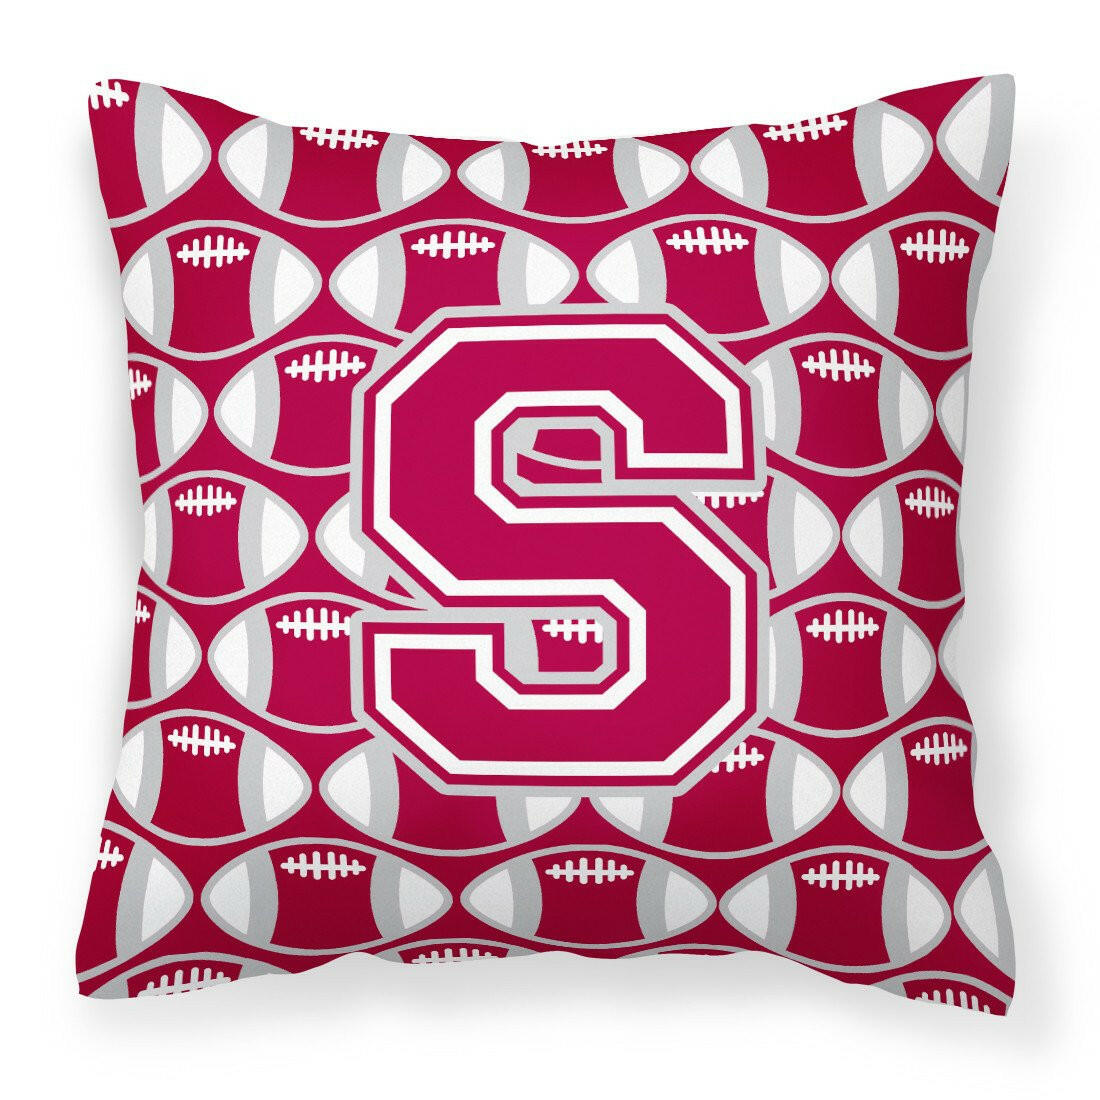 Letter S Football Crimson, grey and white Fabric Decorative Pillow CJ1065-SPW1414 by Caroline's Treasures